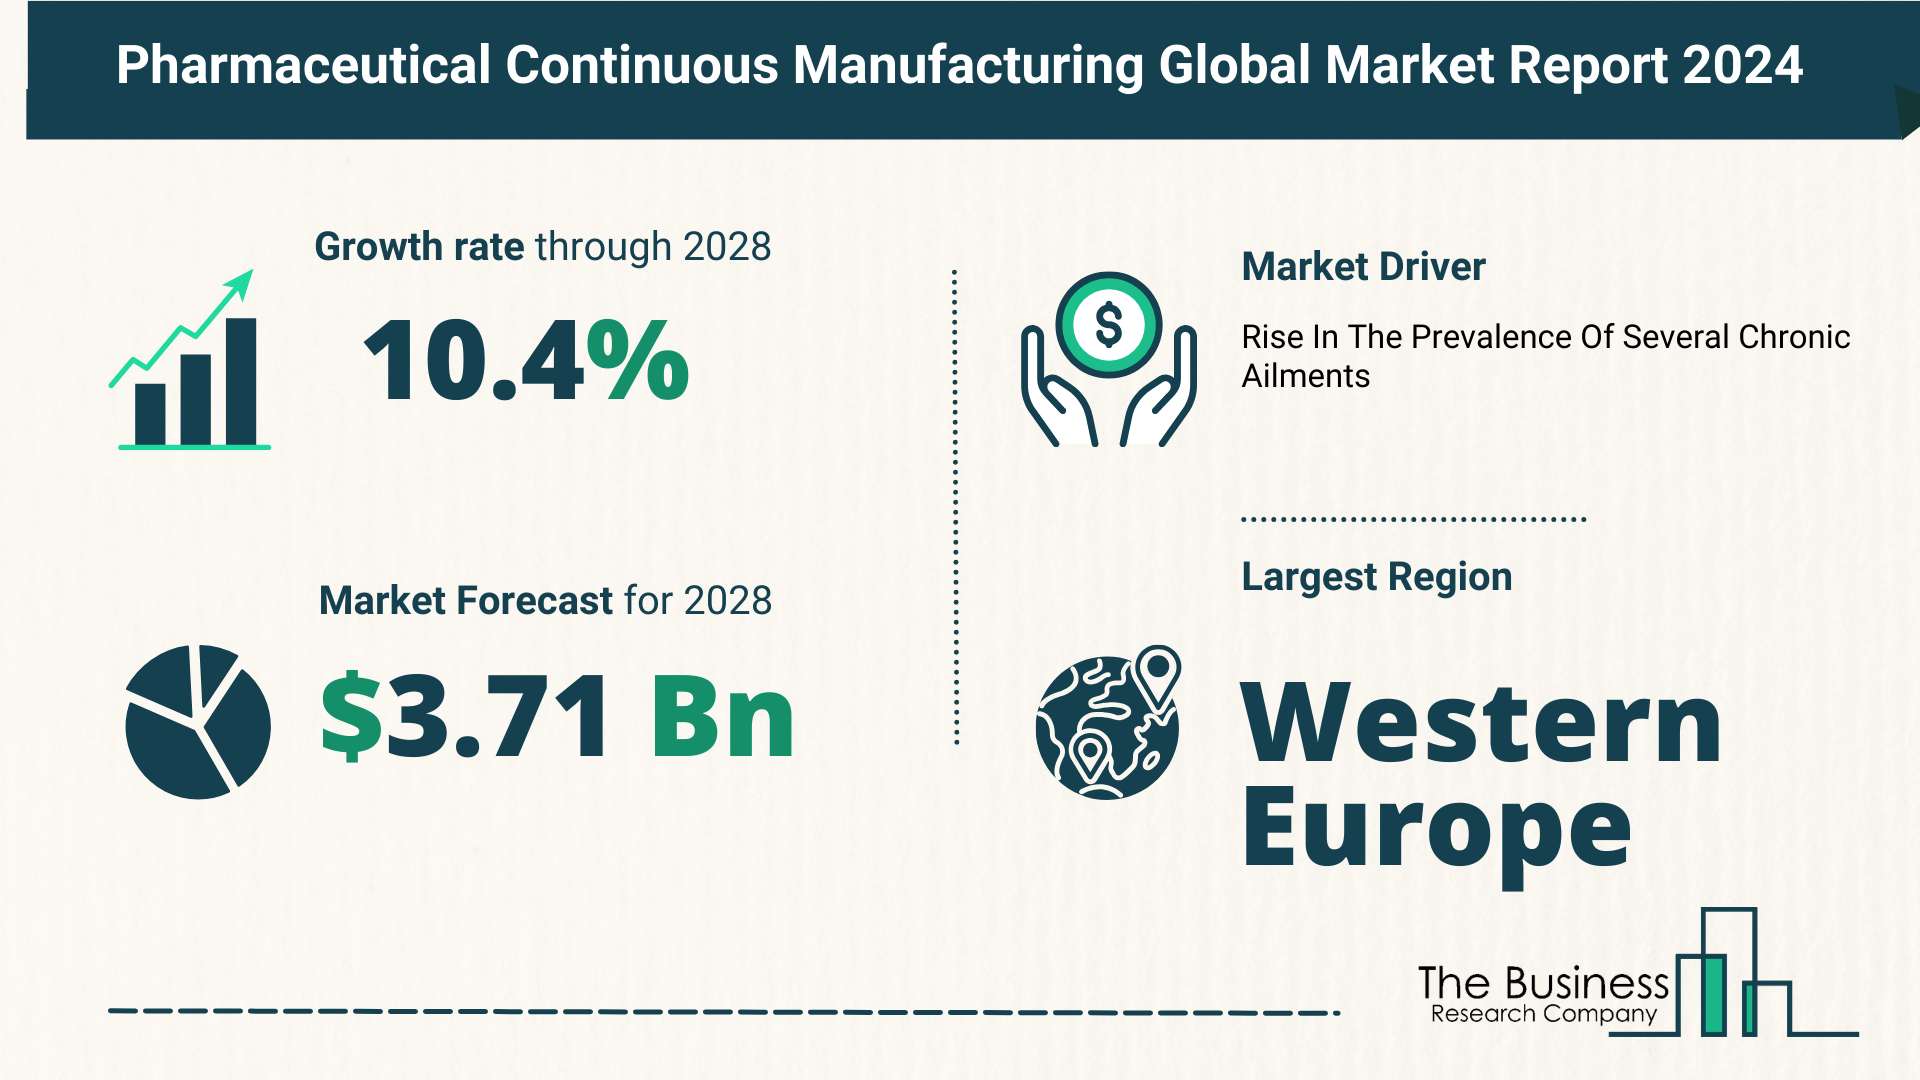 How Is The Pharmaceutical Continuous Manufacturing Market Expected To Grow Through 2024-2033